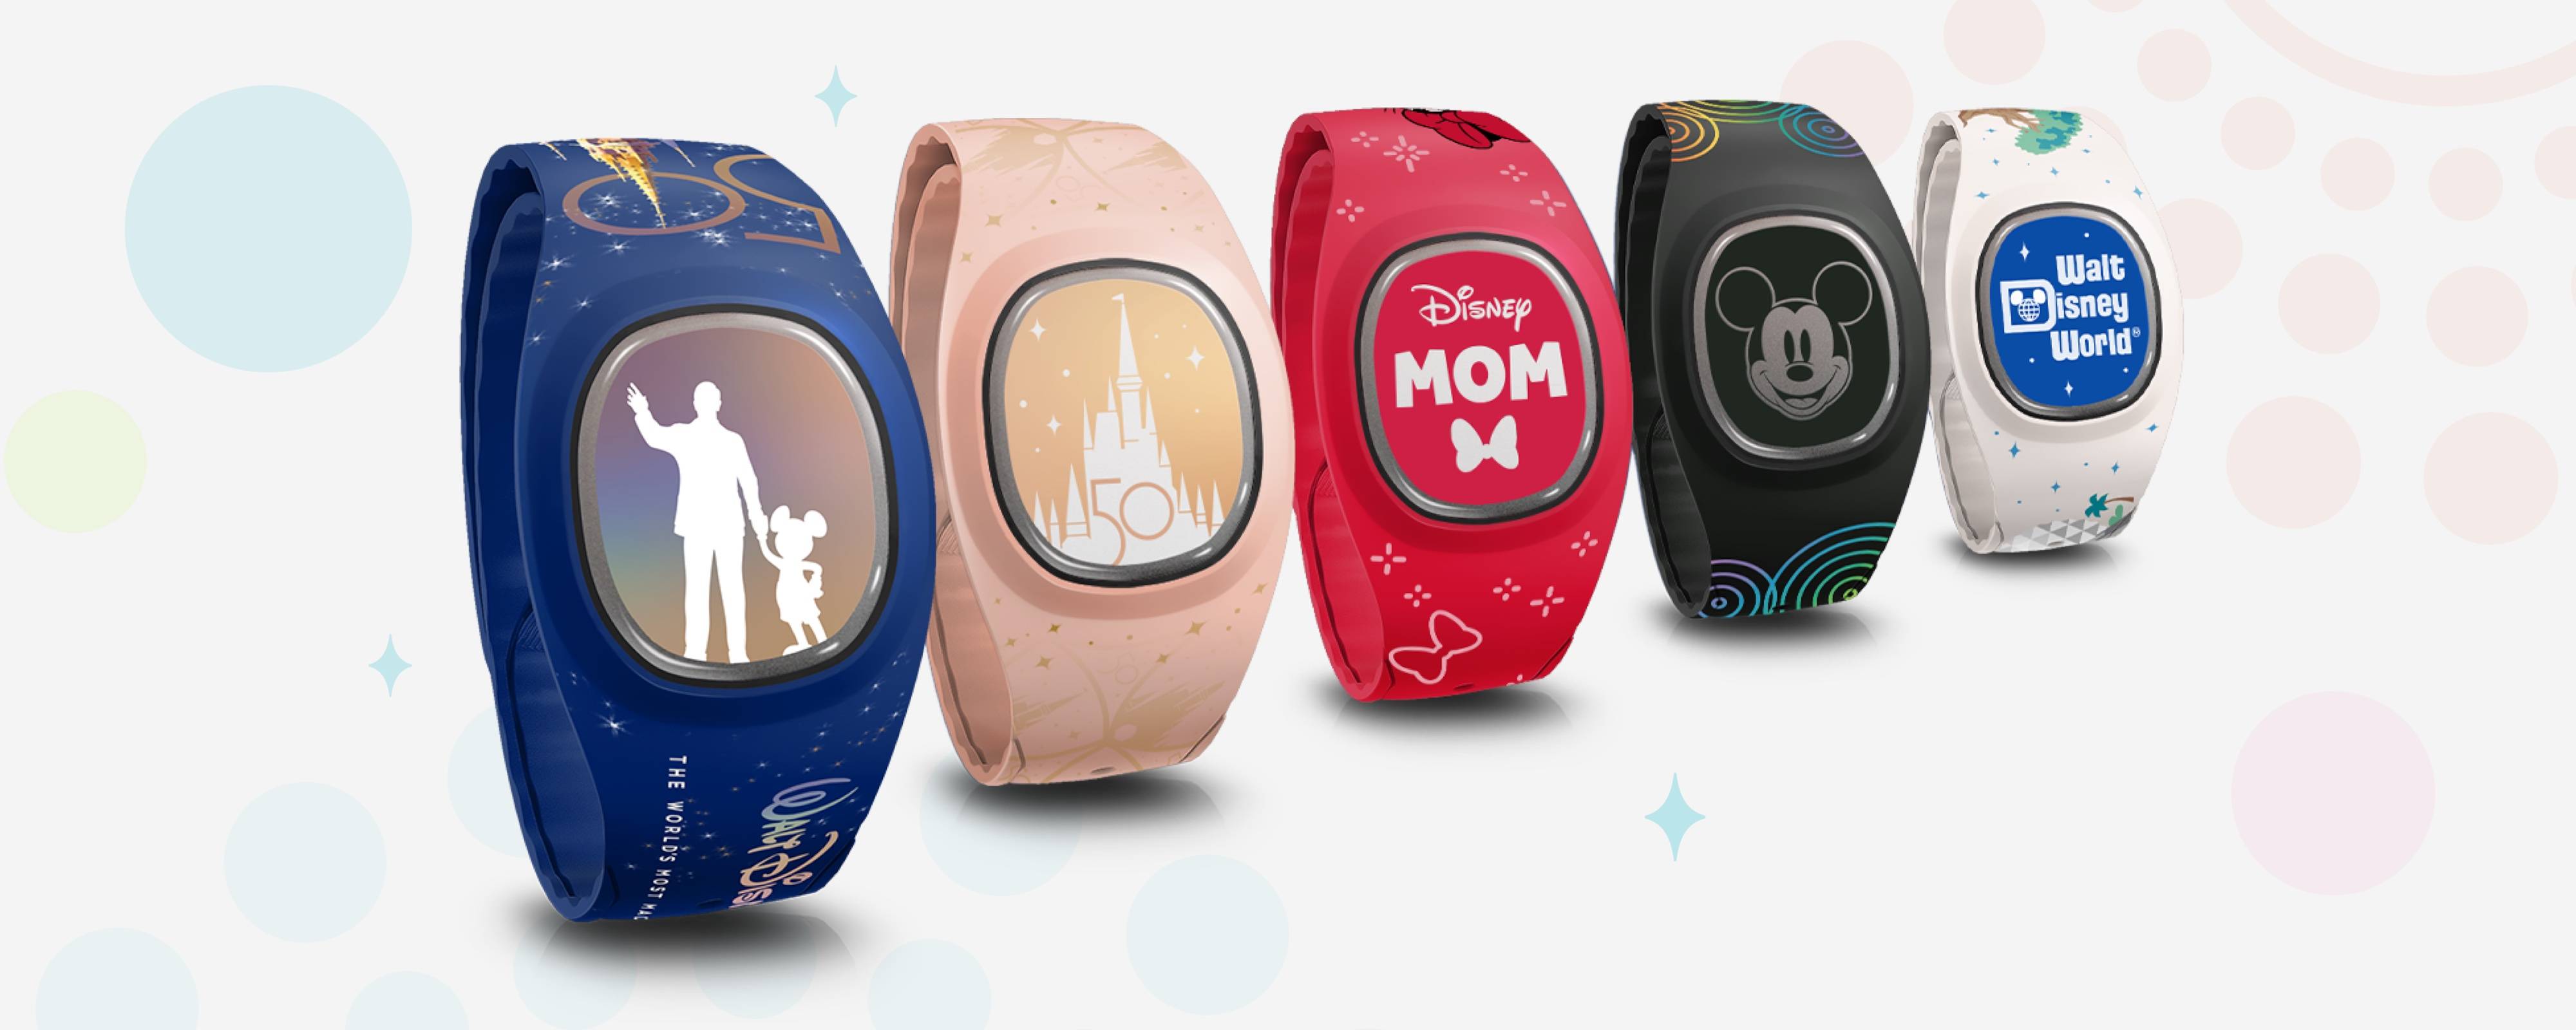 U-Design Apple Watch Bands and Phone Cases Now Available Pre-Made at  Universal Orlando Resort - WDW News Today